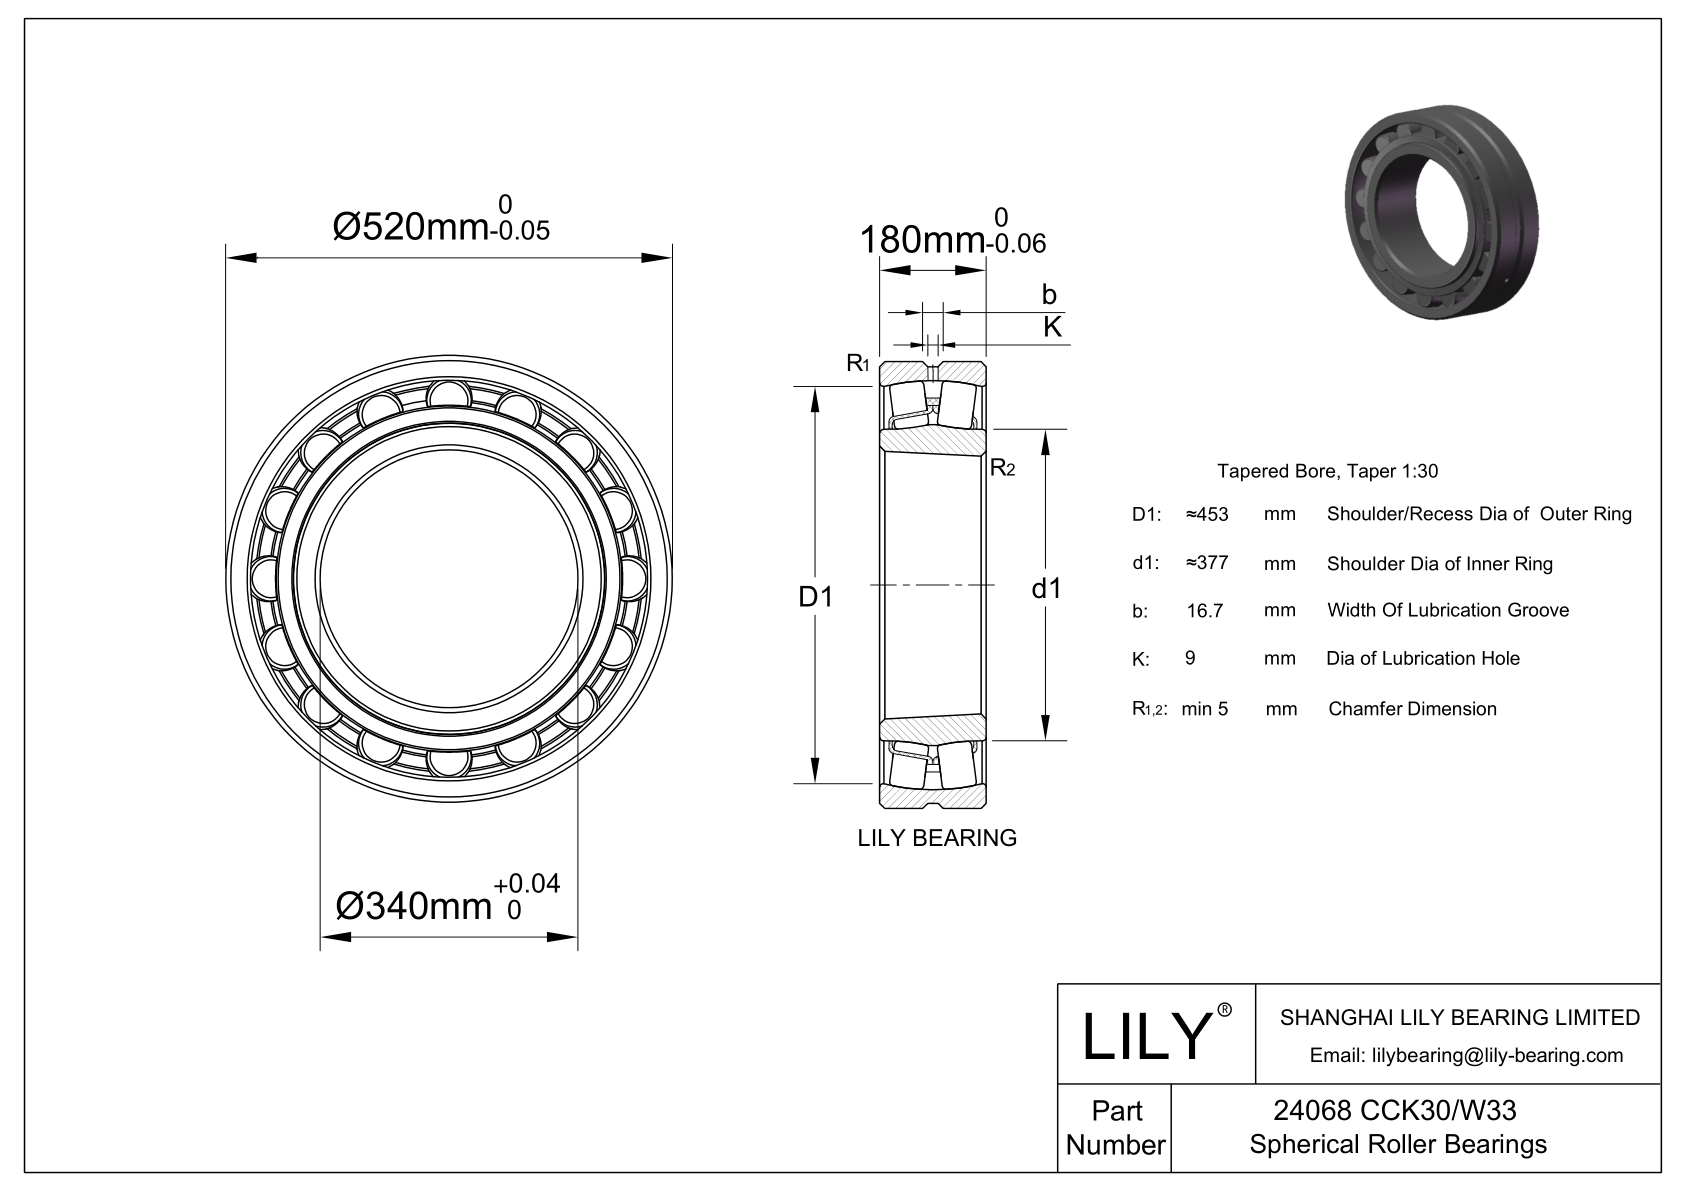 24068 CCK30/W33 Double Row Spherical Roller Bearing cad drawing